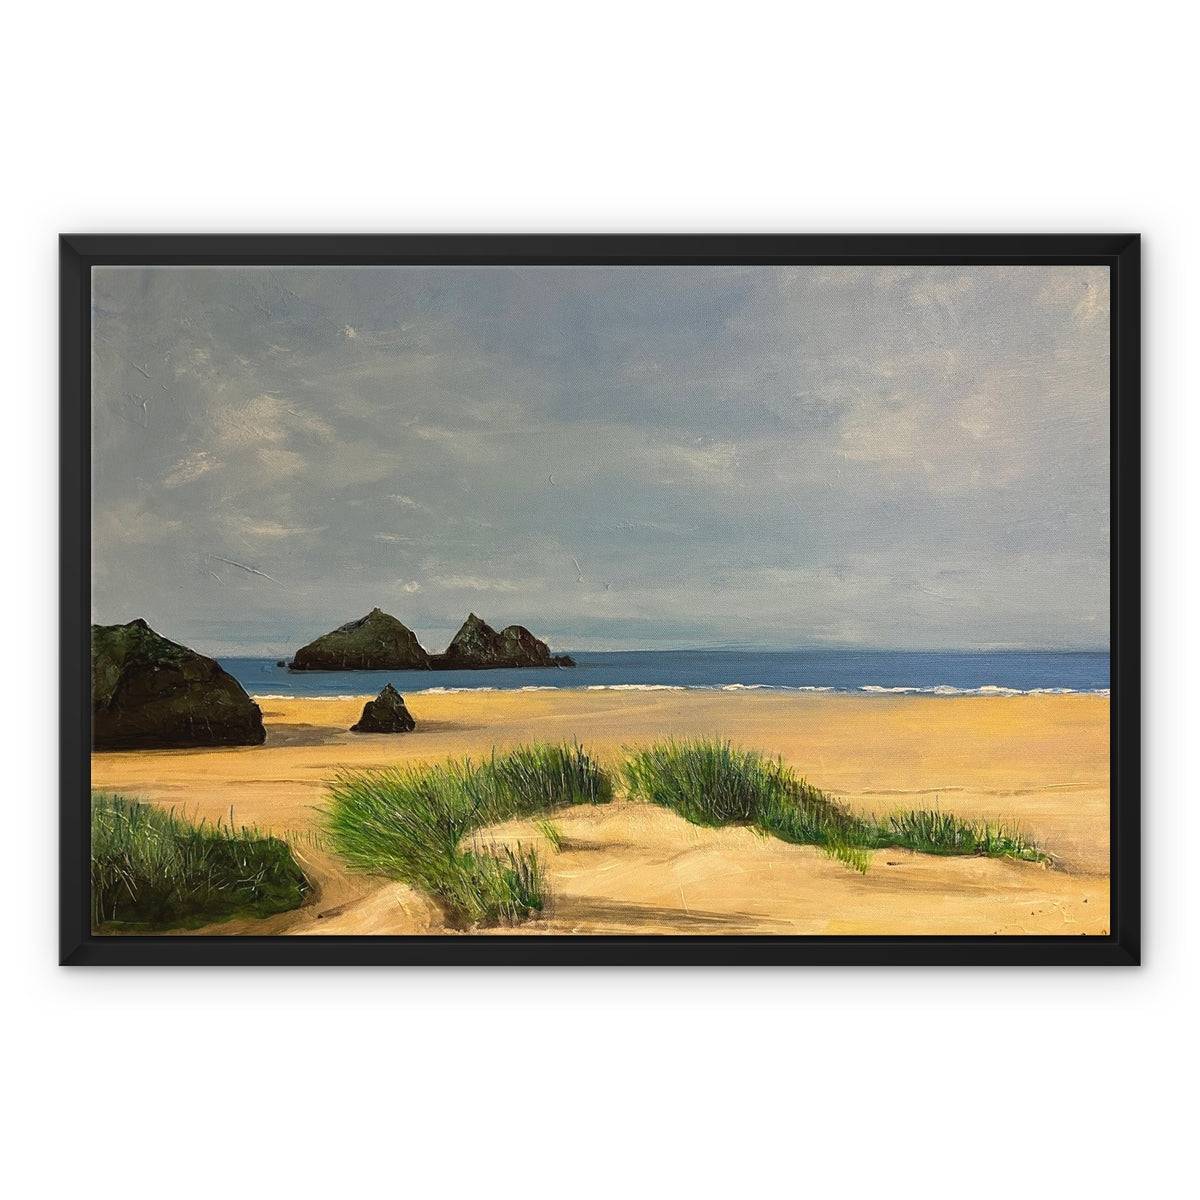 Holywell Bay Cornwall Painting | Framed Canvas From Scotland-Floating Framed Canvas Prints-World Art Gallery-24"x18"-Paintings, Prints, Homeware, Art Gifts From Scotland By Scottish Artist Kevin Hunter